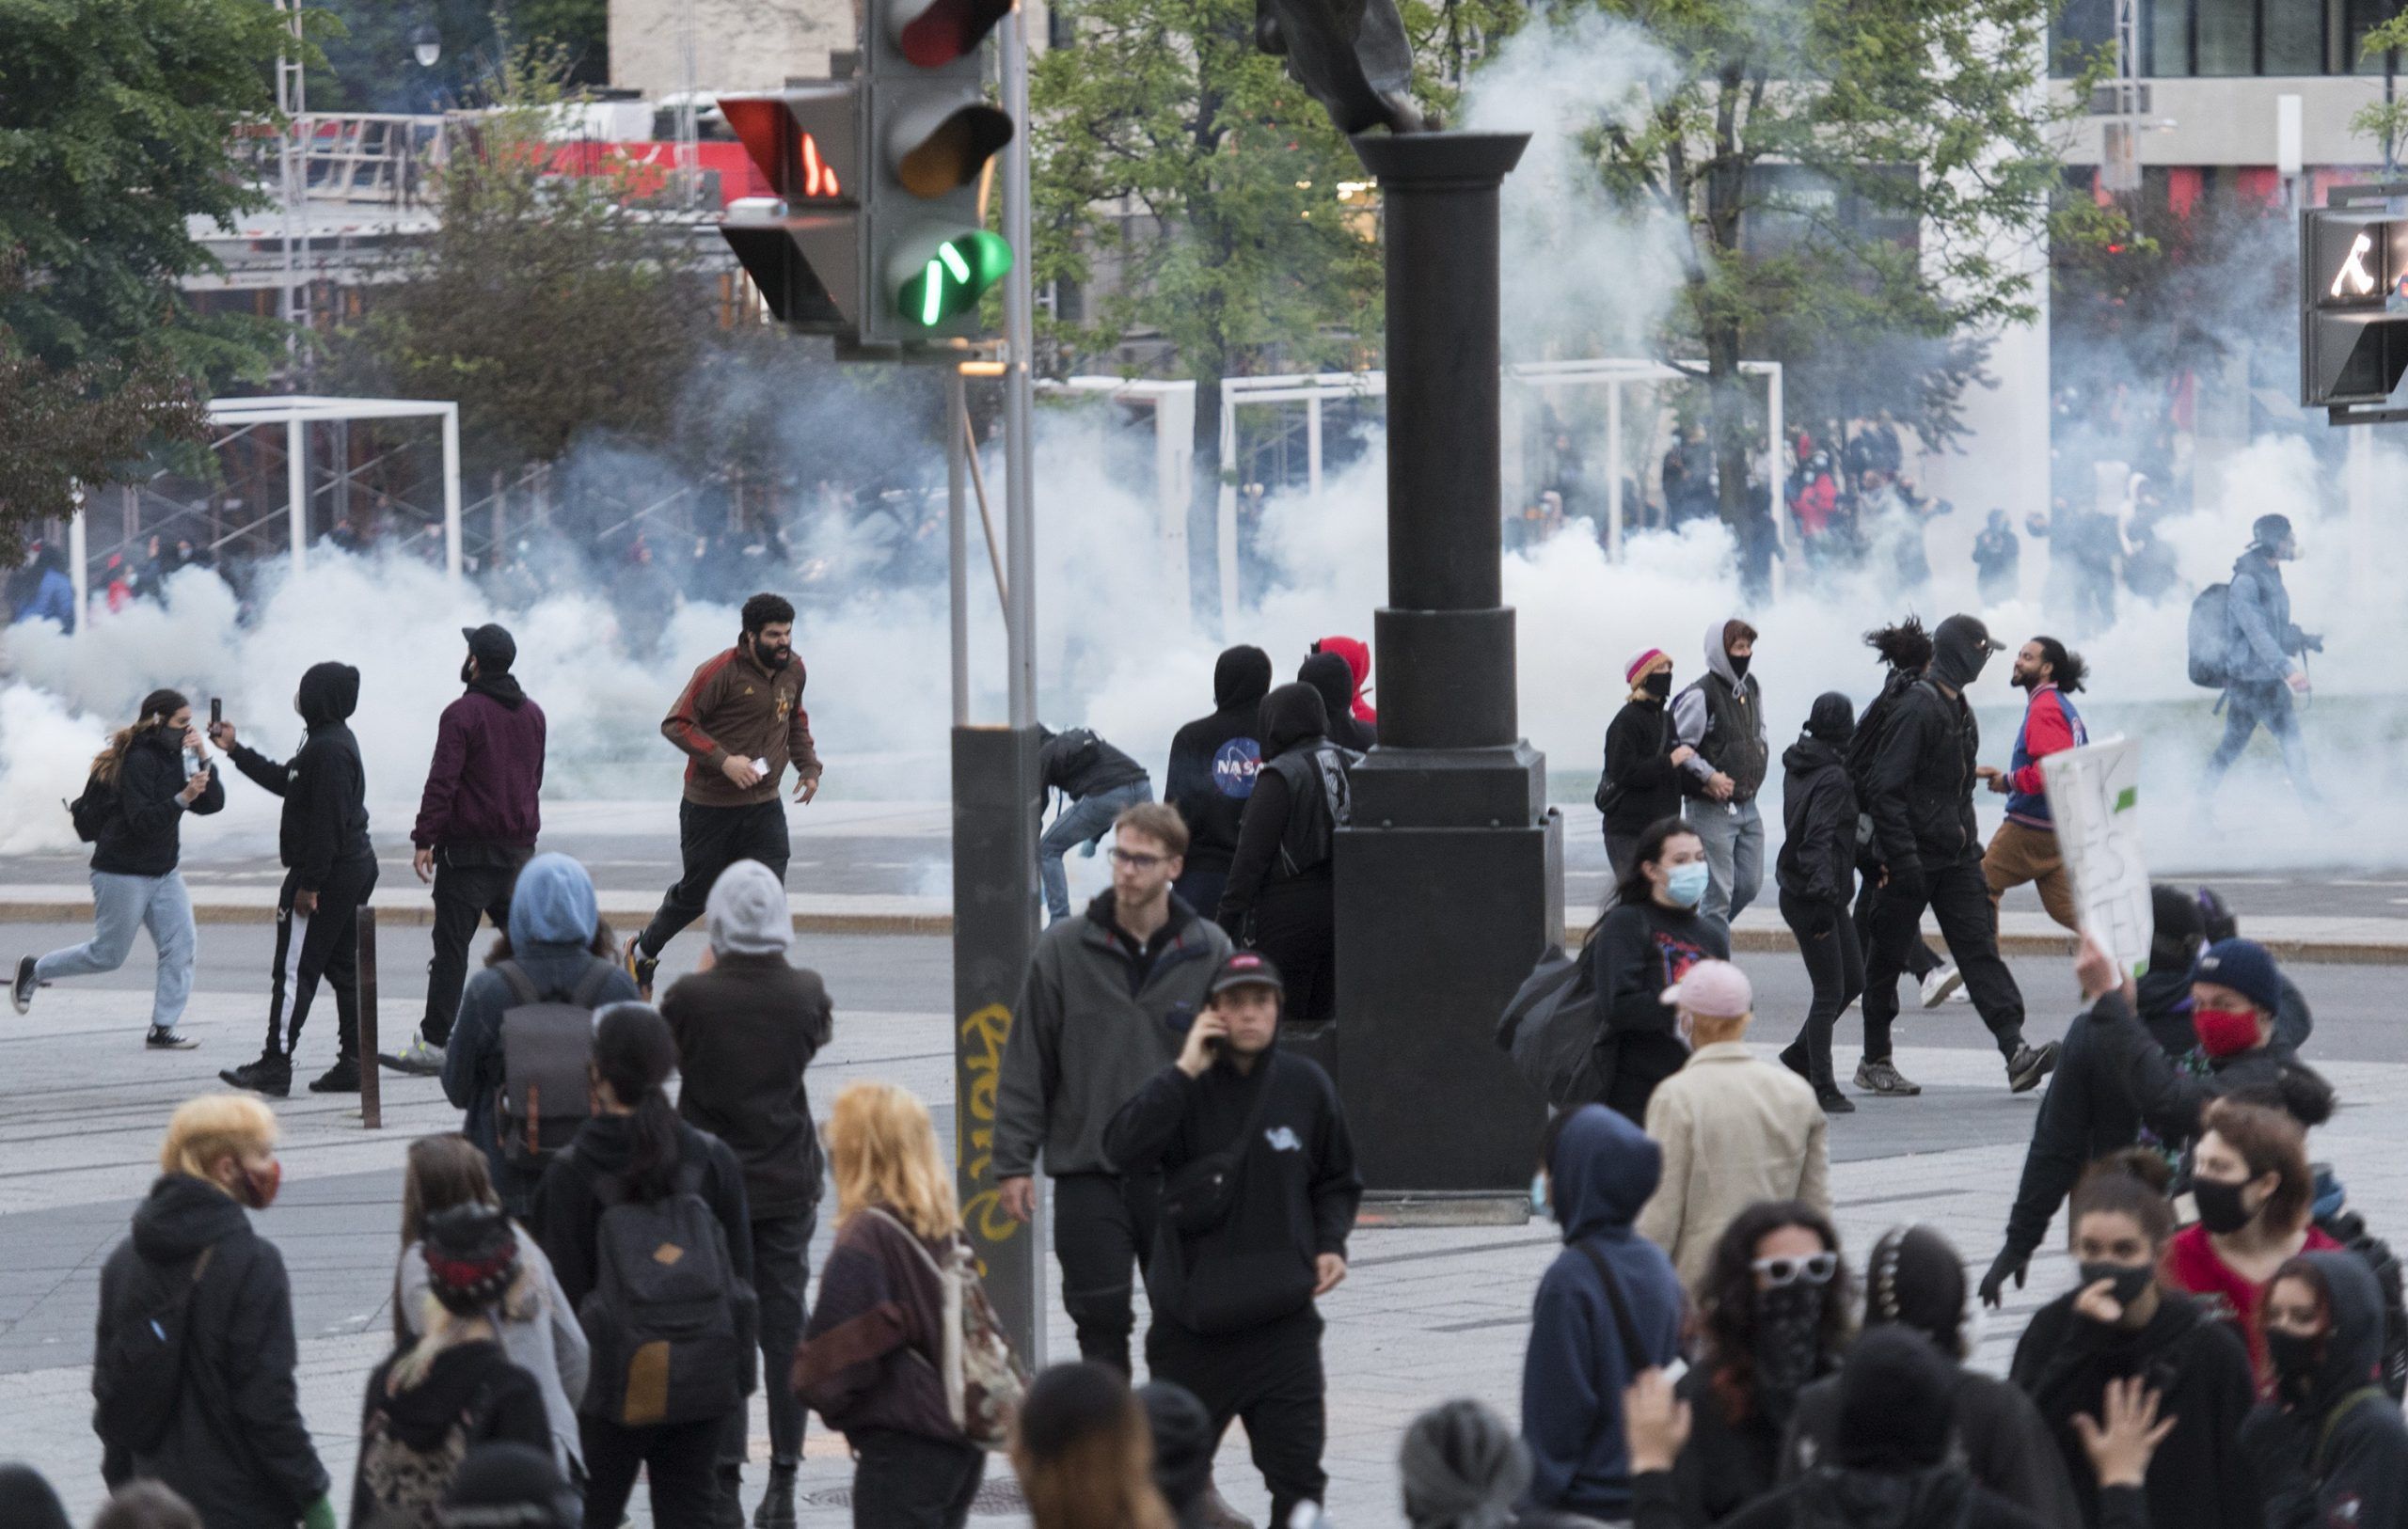 Protesters run from police during a demonstration calling for justice in the death of George Floyd and victims of police brutality in Montreal, Sunday, May 31, 2020.